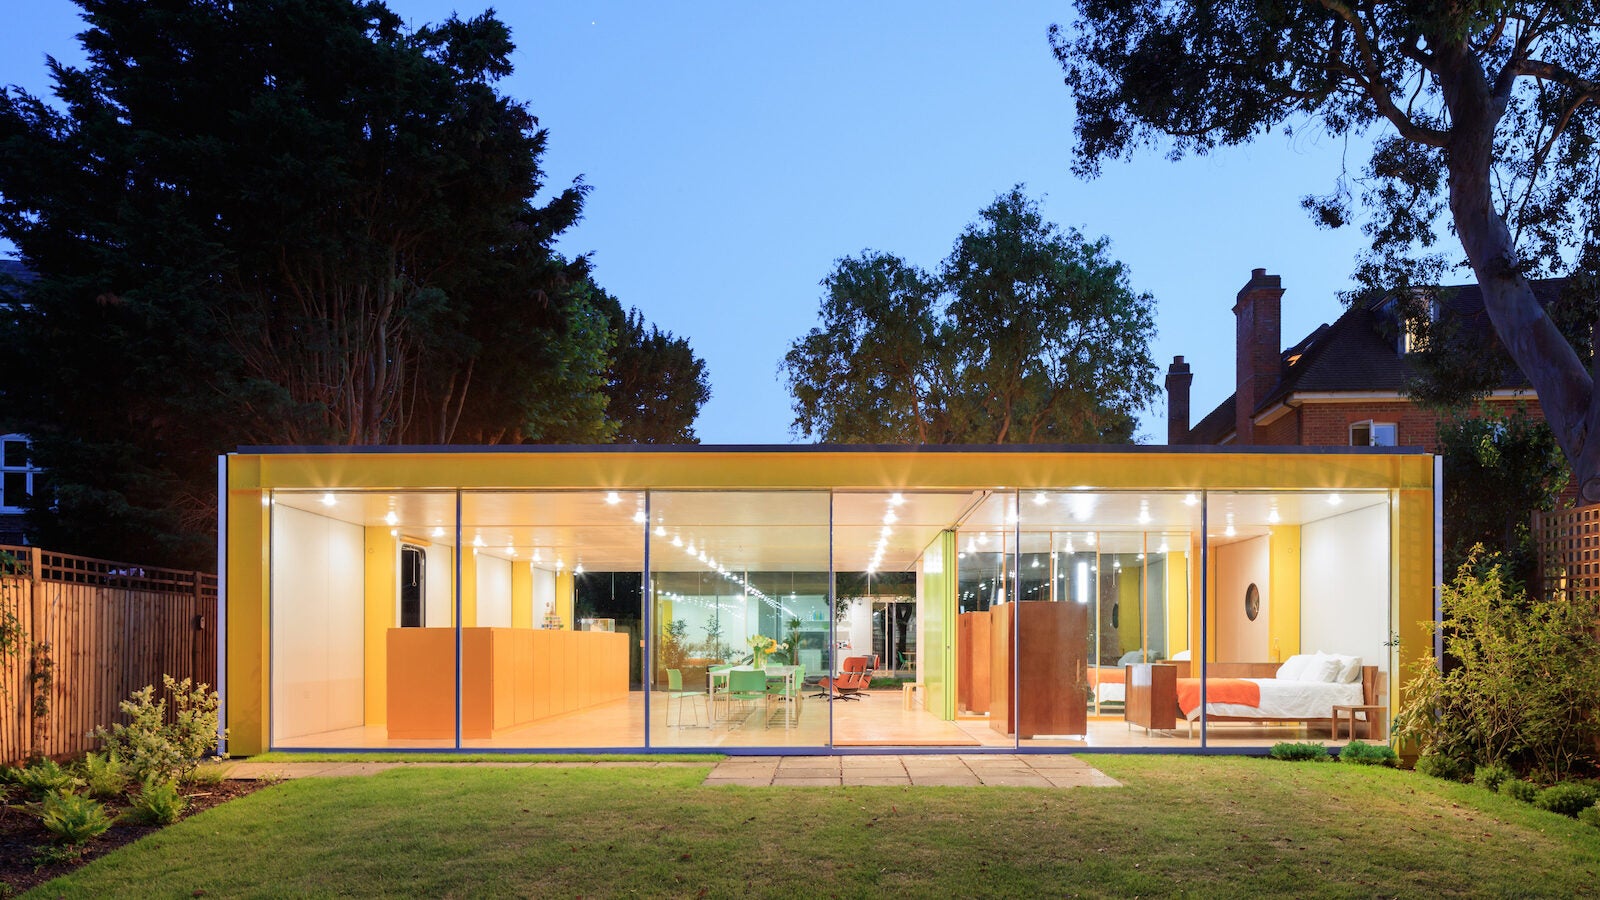 The modular home world-renowned British architect Richard Rogers designed for his parents in the 1960s now serves as an urban studies lab for the Harvard Graduate School of Design.